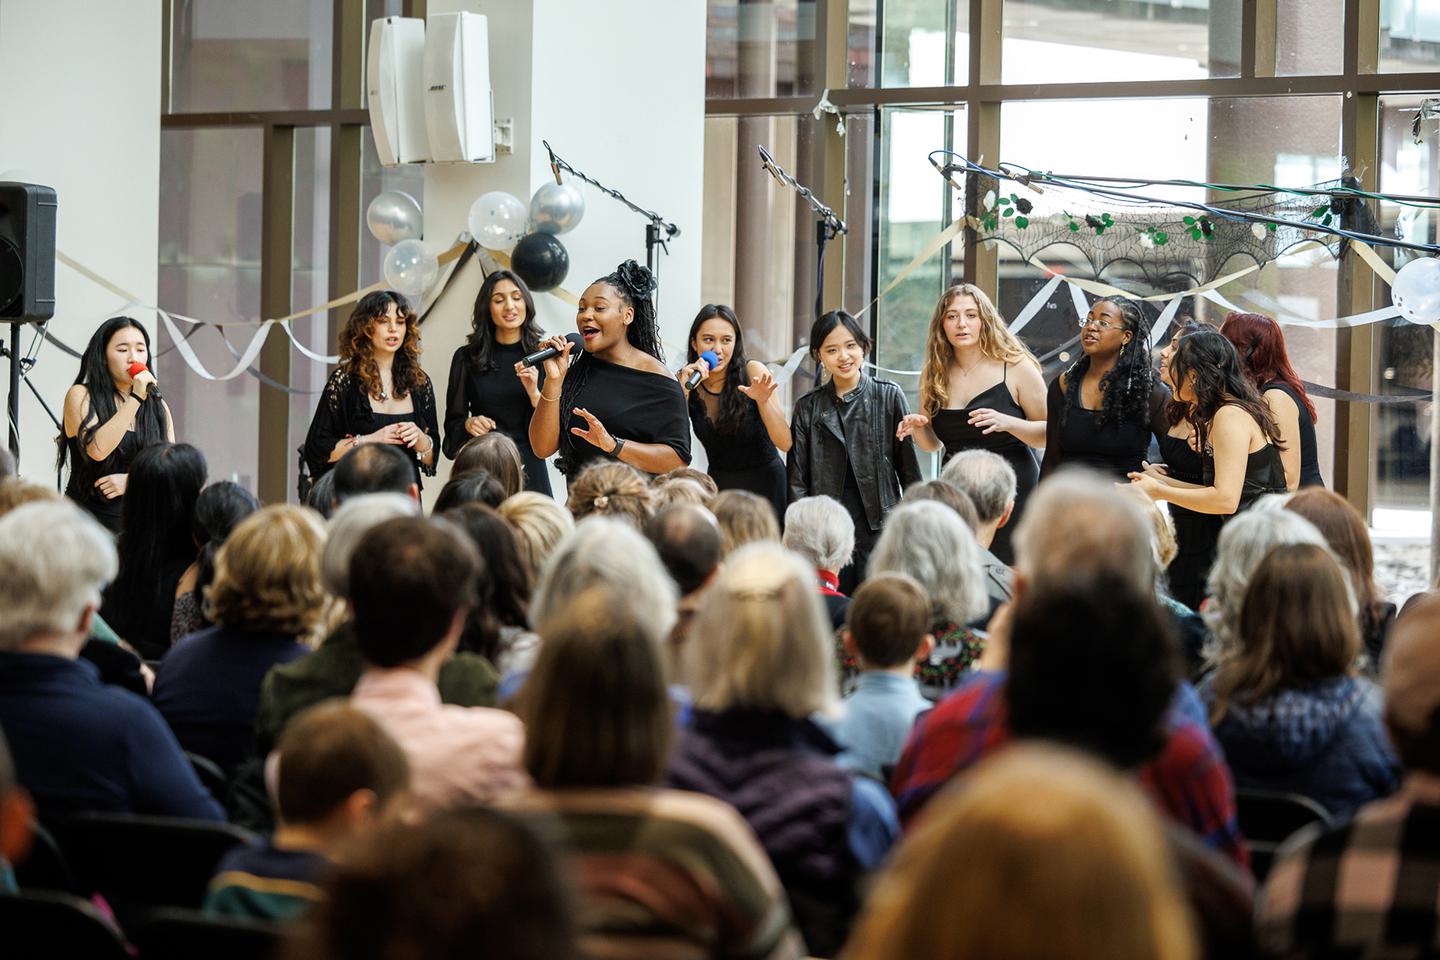 A group of students stand in front of an audience and sings.